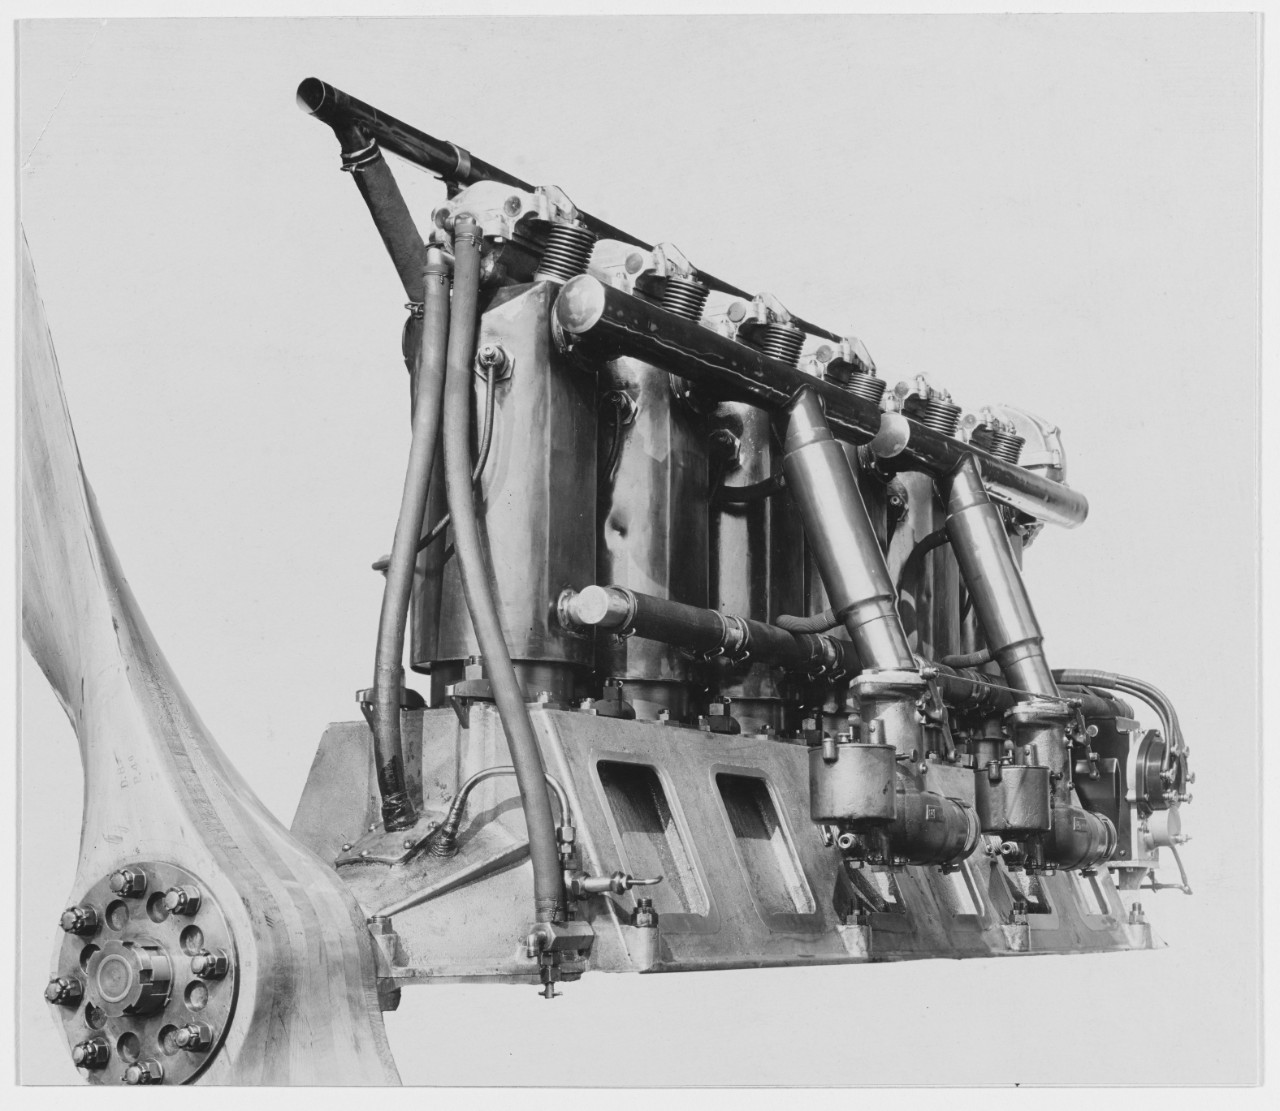 Union 6 Cylinder In-Line Engine, 125 H.P.